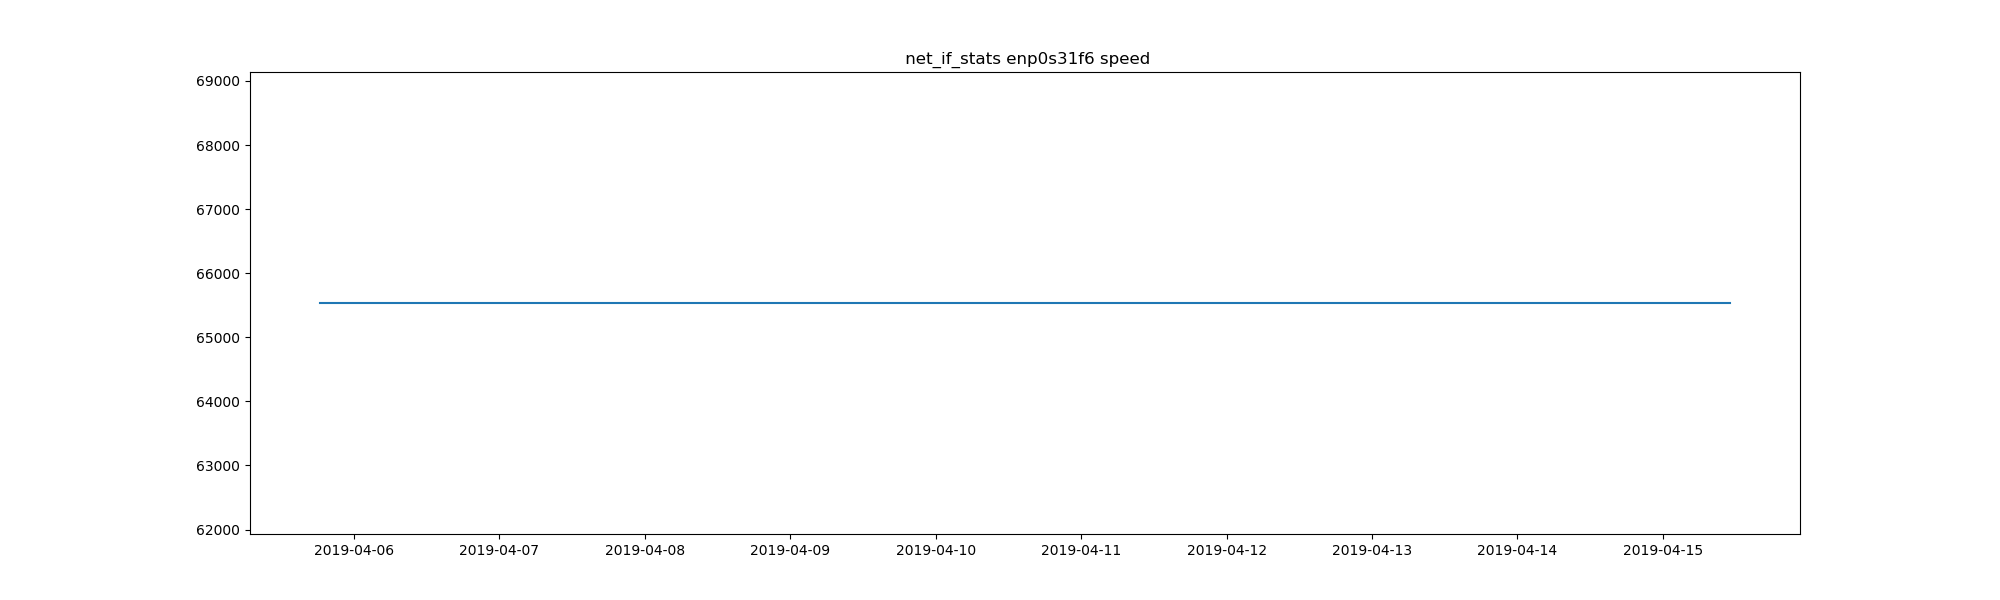 task-network-net_if_stats-tipbr0-enp0s31f6-isup-duplex-speed.png